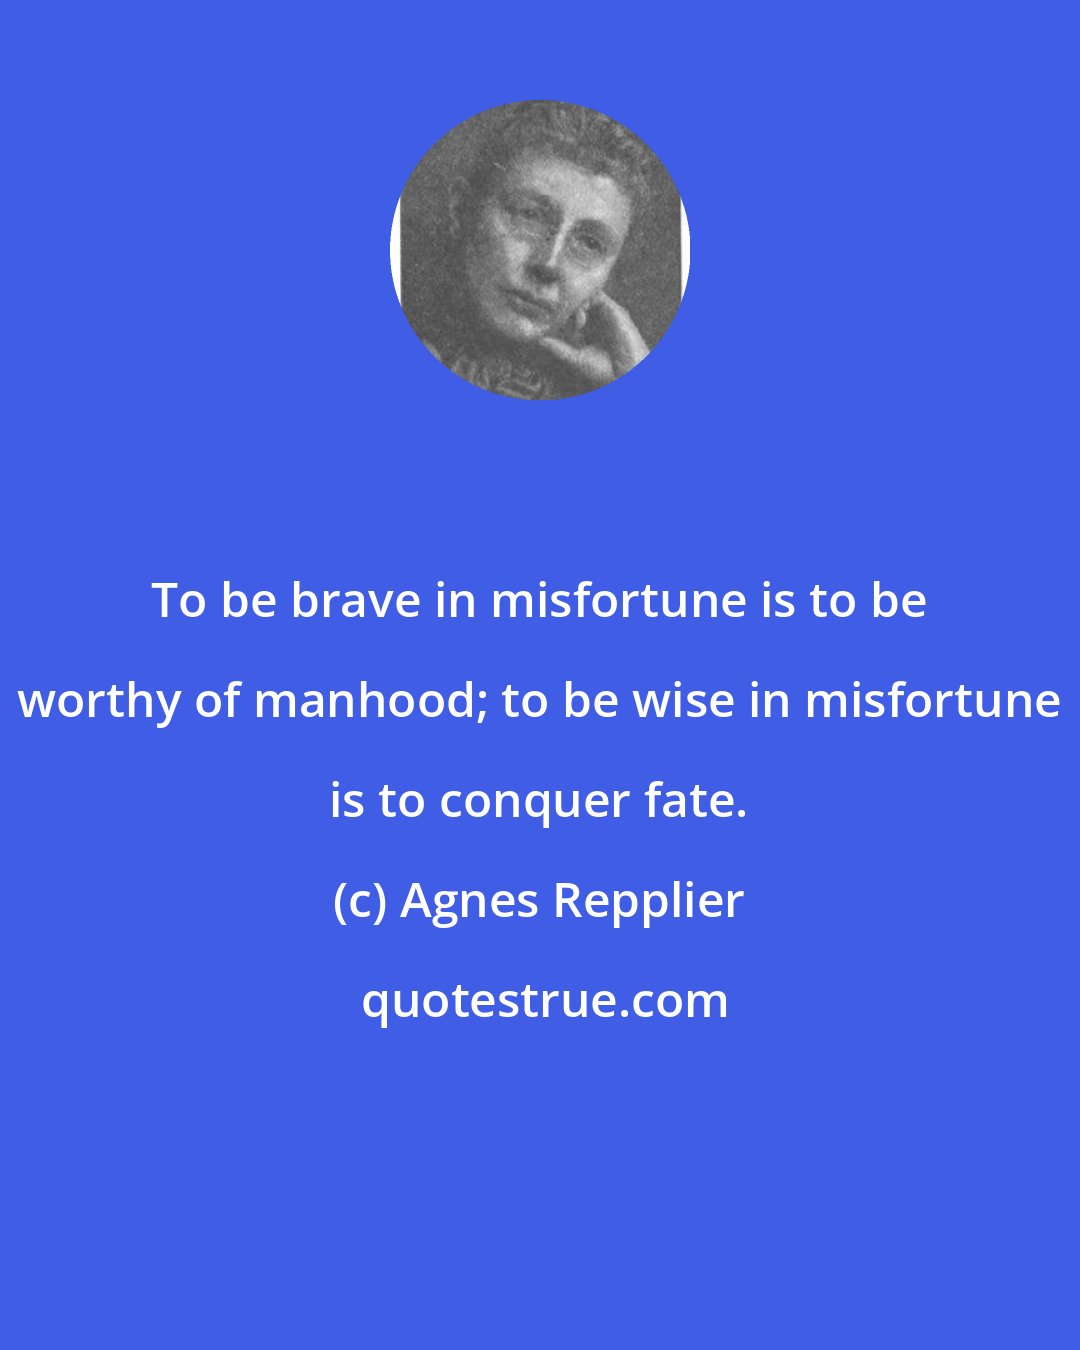 Agnes Repplier: To be brave in misfortune is to be worthy of manhood; to be wise in misfortune is to conquer fate.